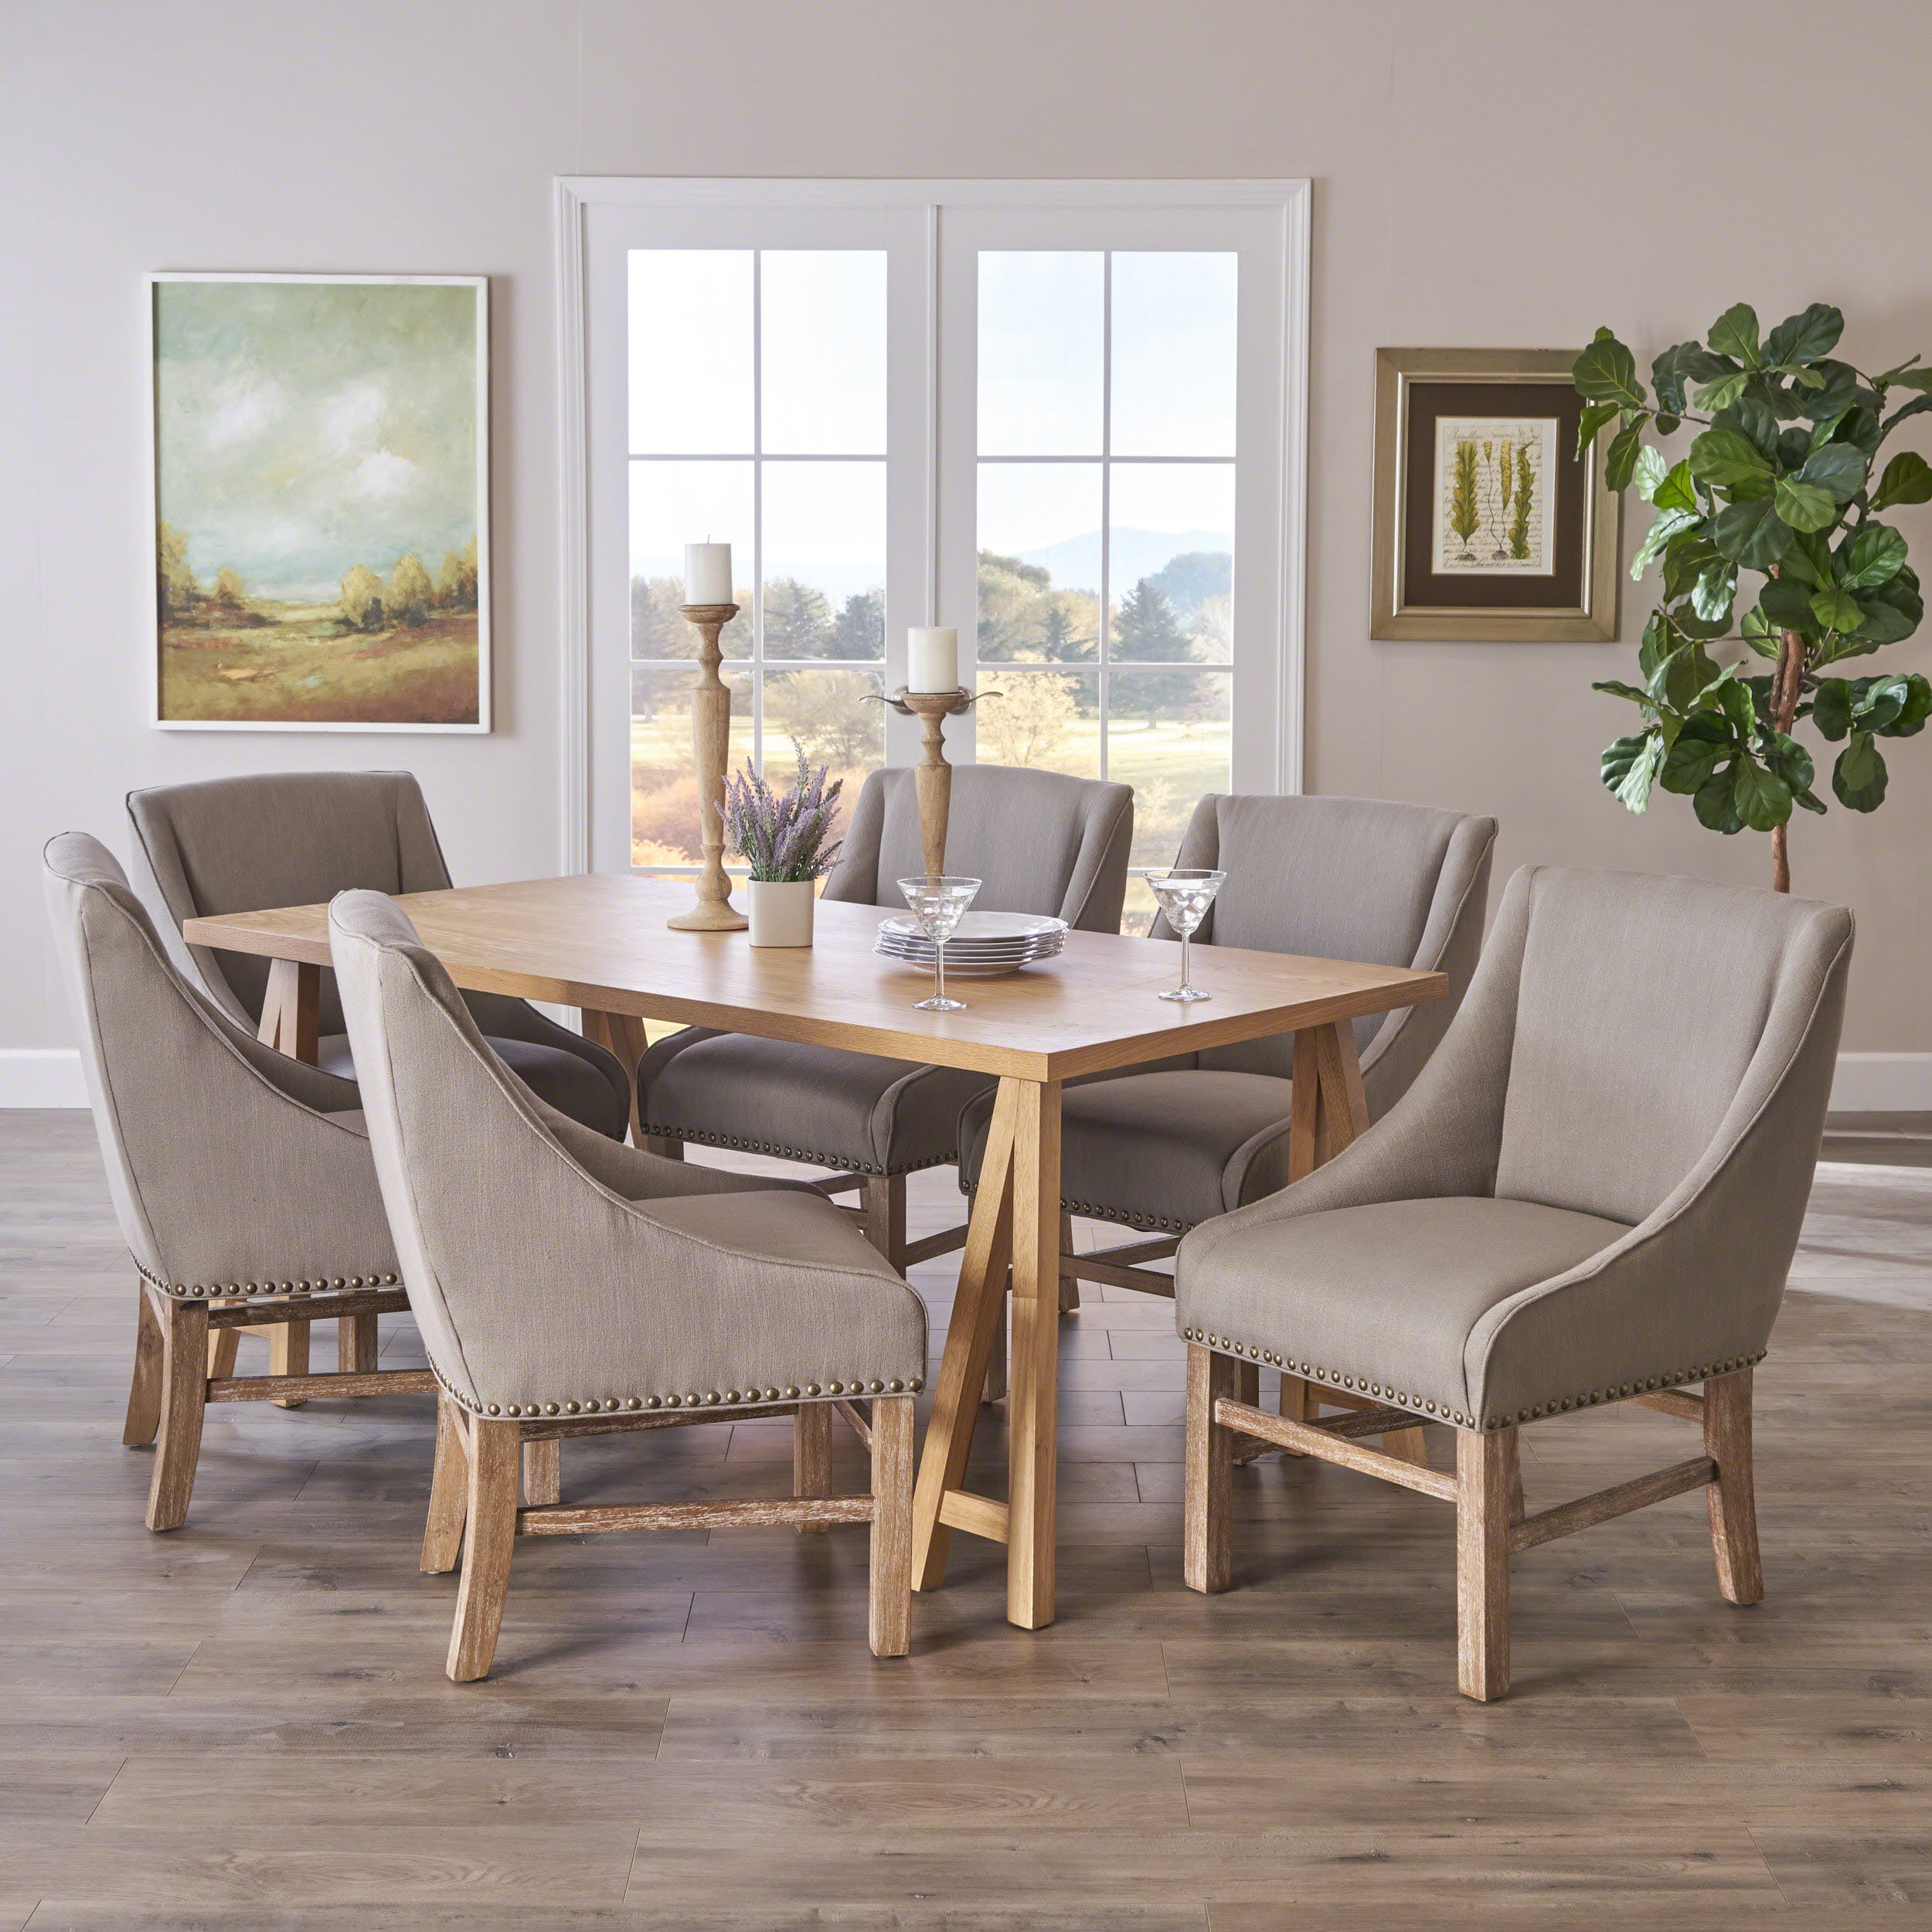 Sarrave Farmhouse Dining Set with Fabric Dining Chairs, Natural Oak and ...